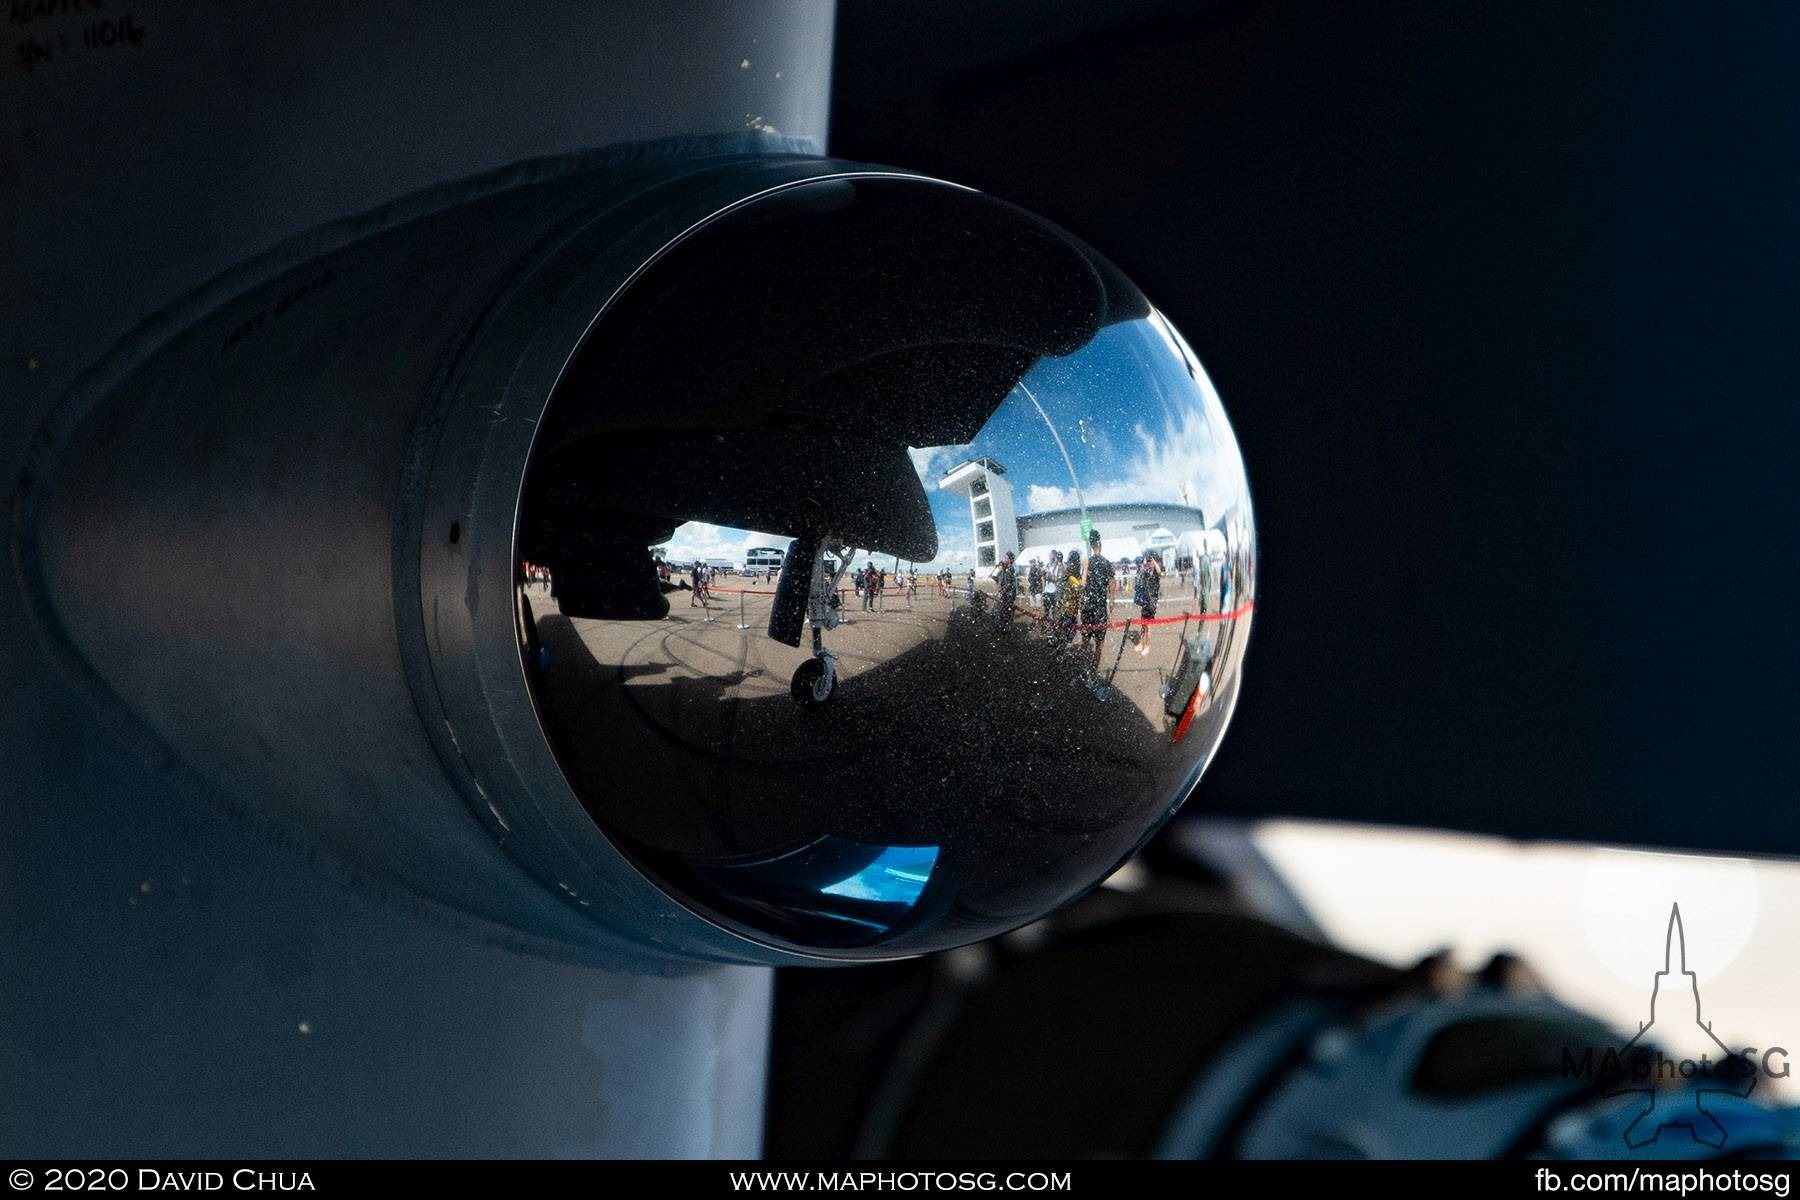 The iconic Singapore Airshow tower reflected on the IRST of the F-15SG